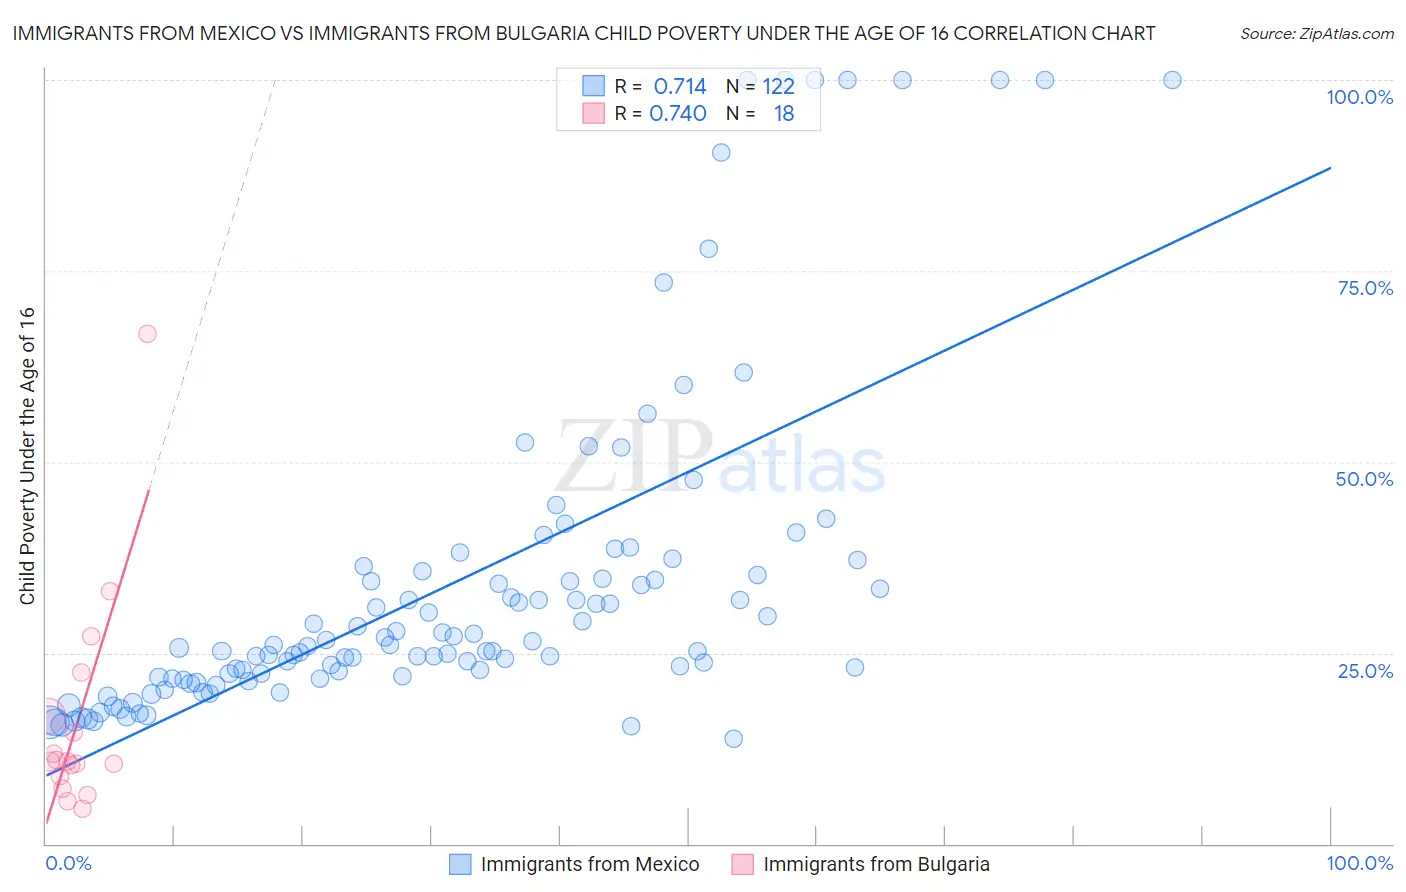 Immigrants from Mexico vs Immigrants from Bulgaria Child Poverty Under the Age of 16